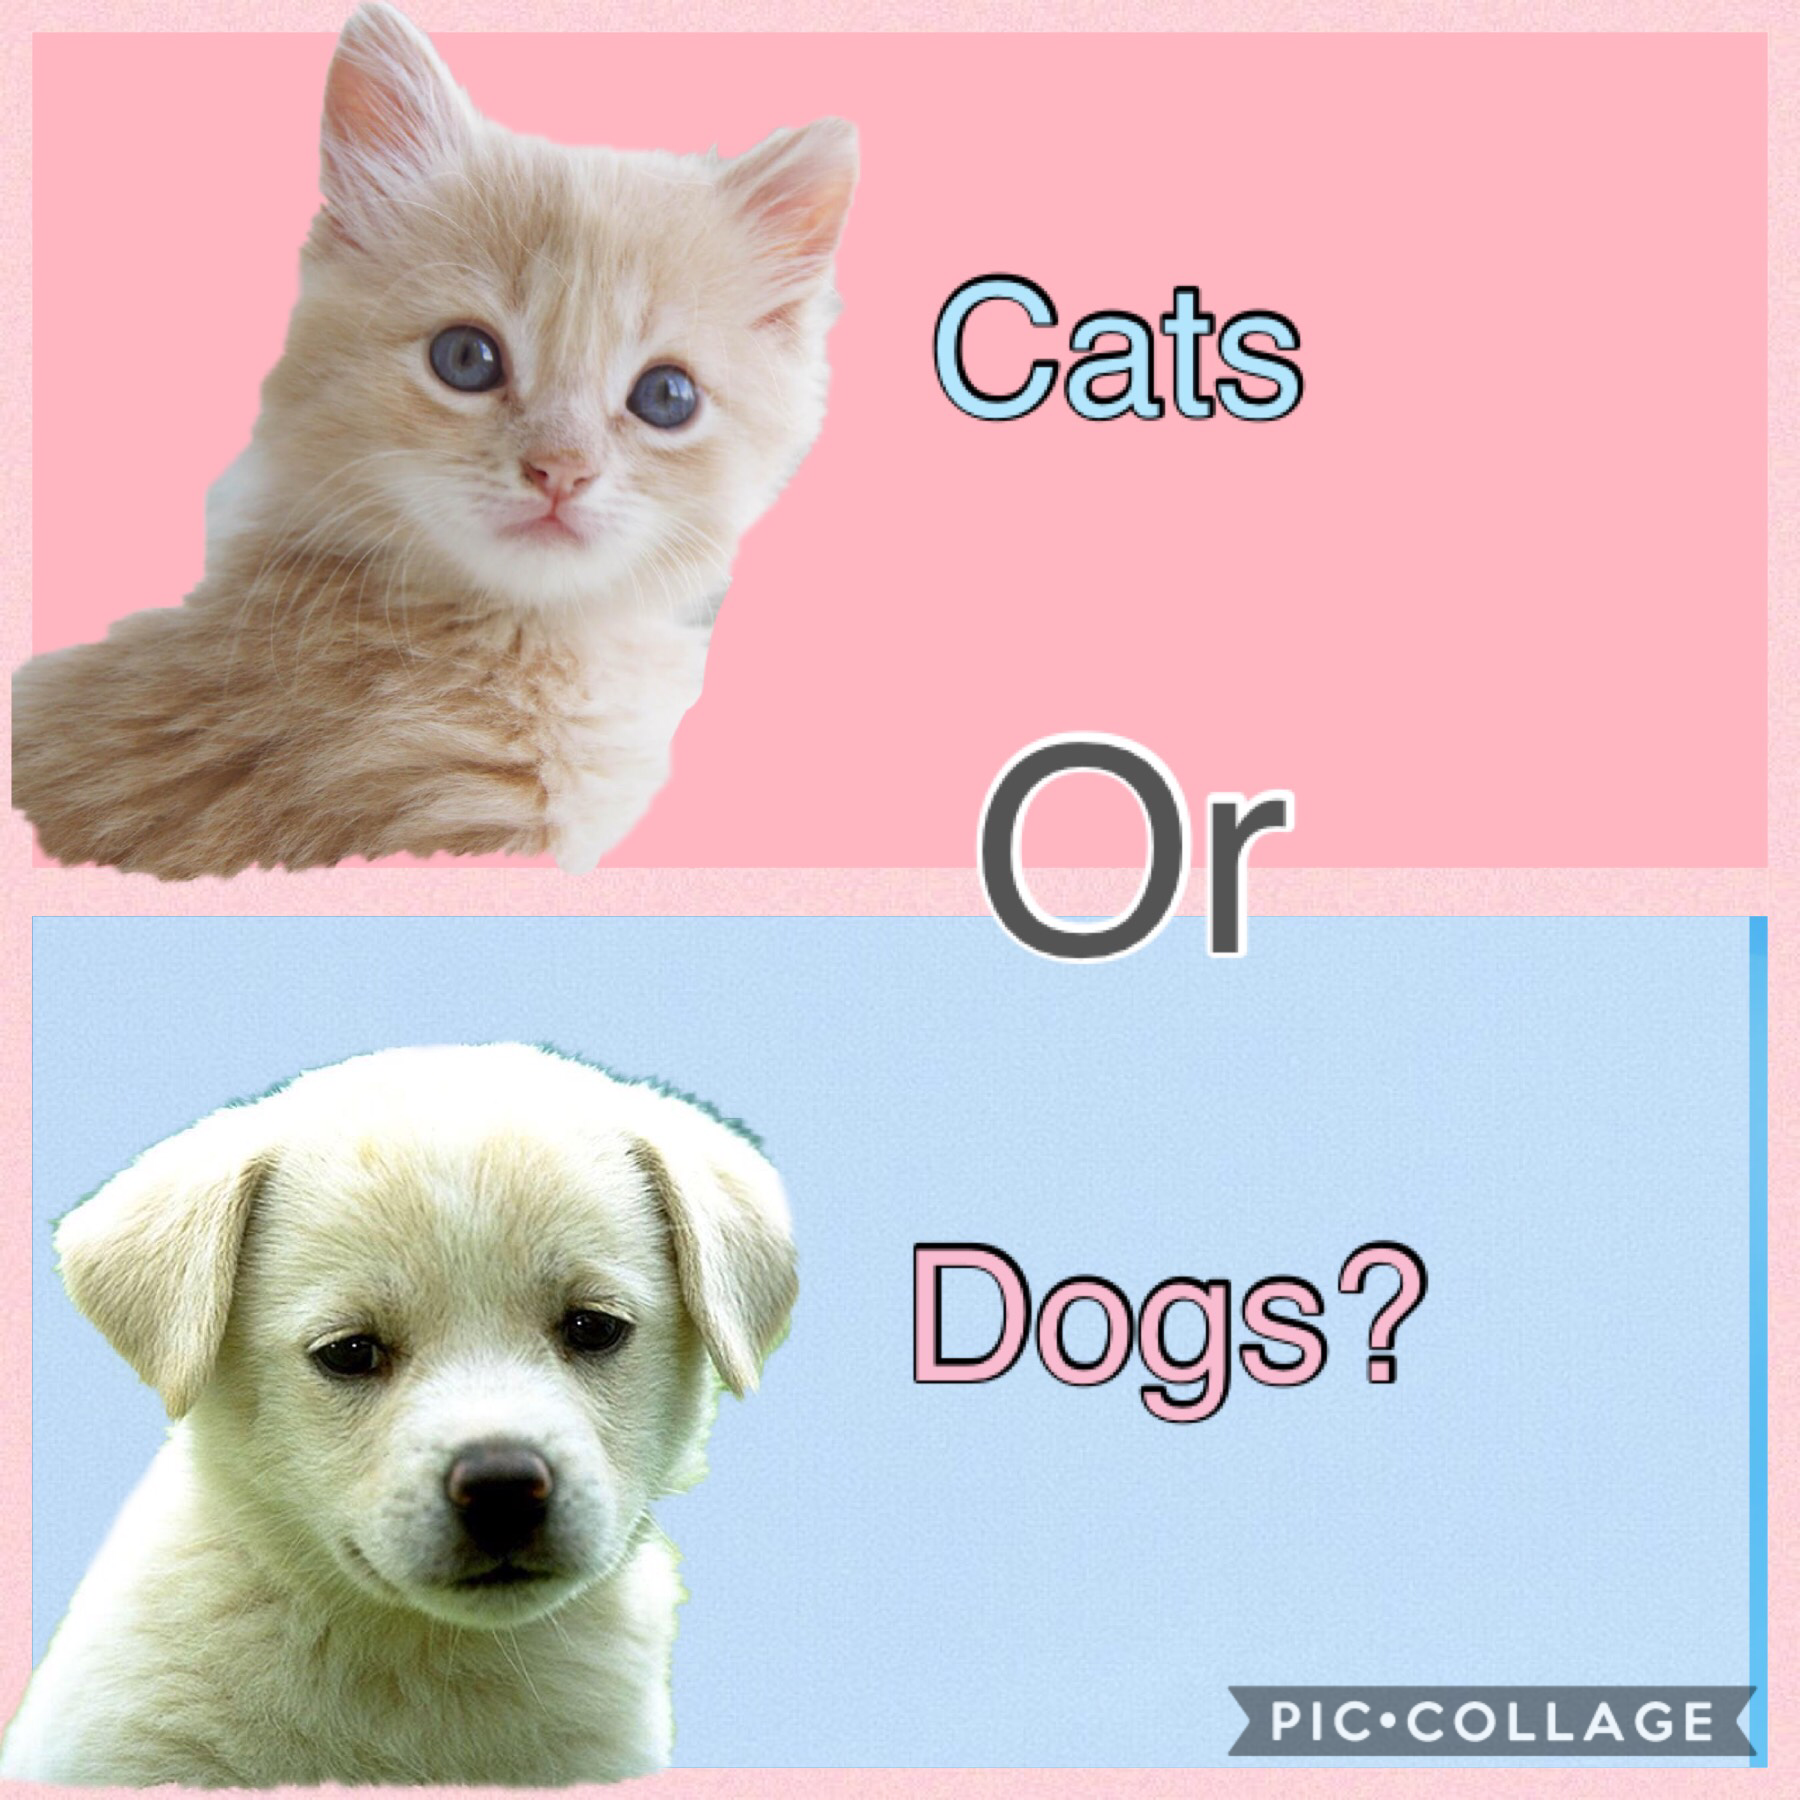 Cats or dogs? Tell me your preFURence in the comments! Sry bought my bad jokes... For me it's cats!